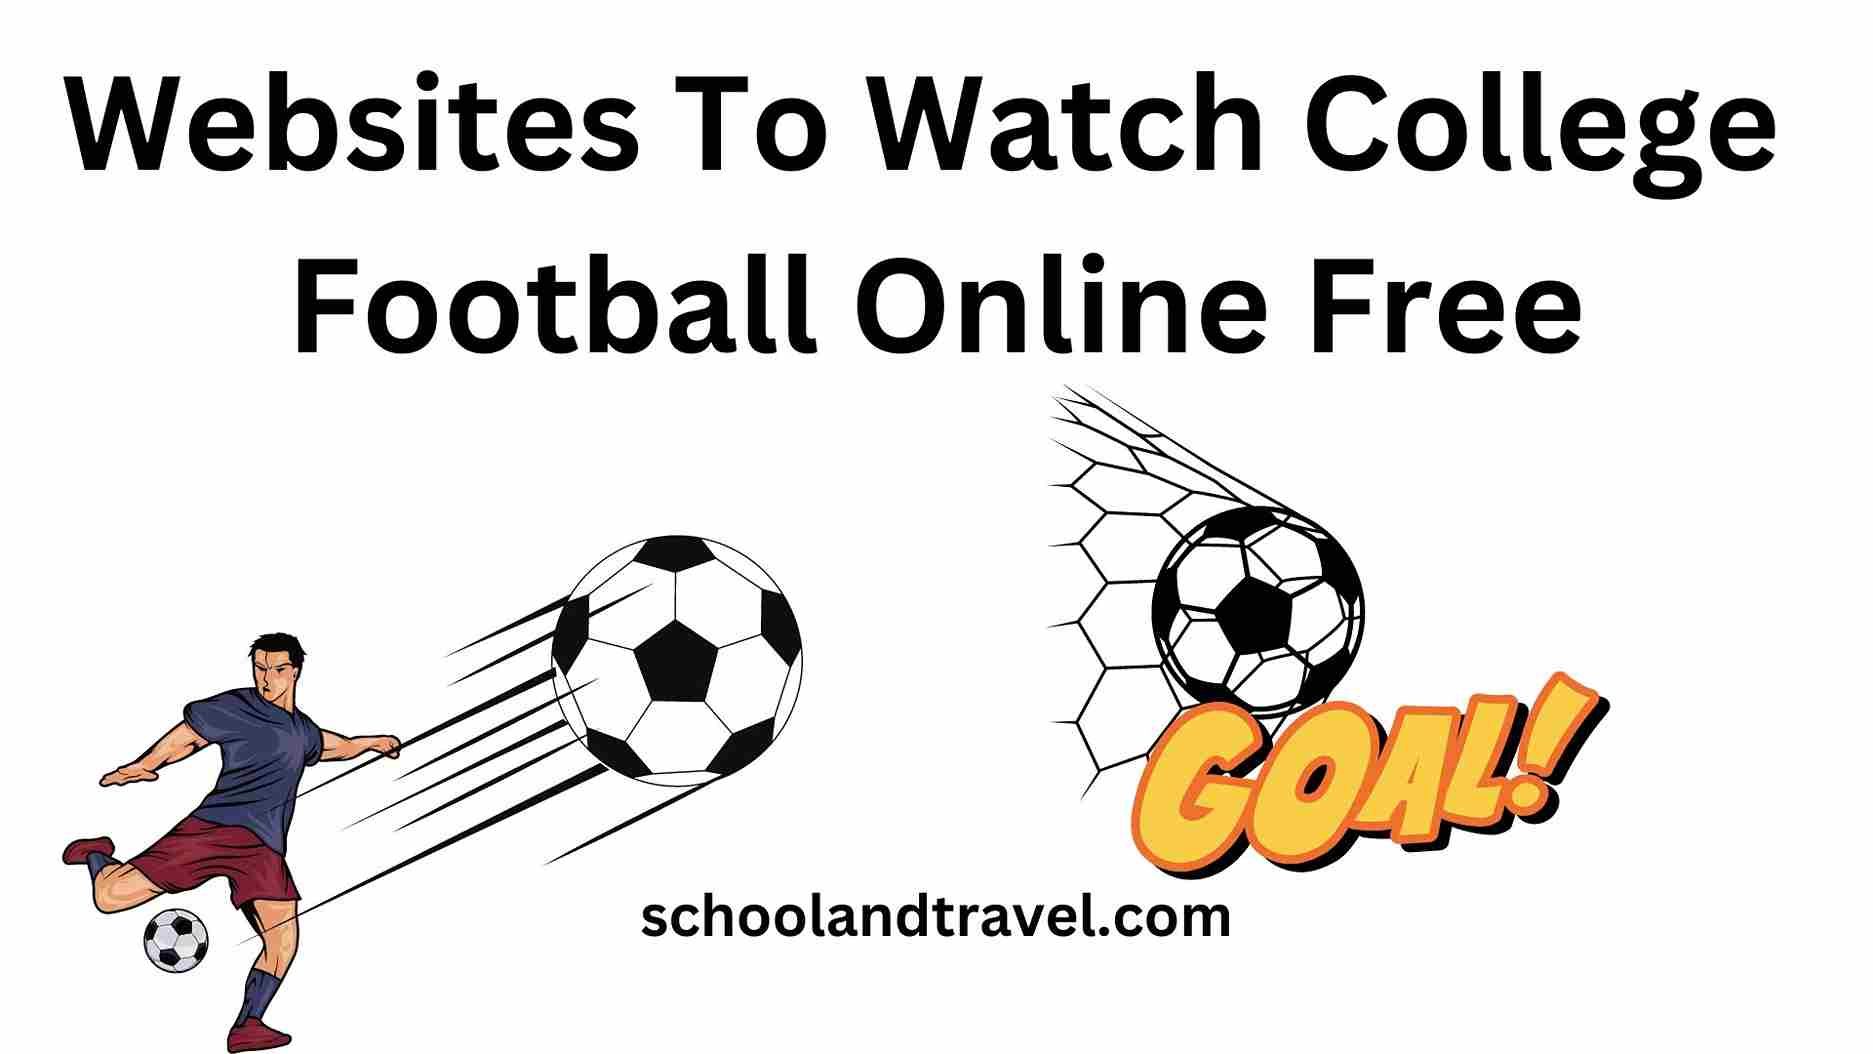 Websites To Watch College Football Online Free